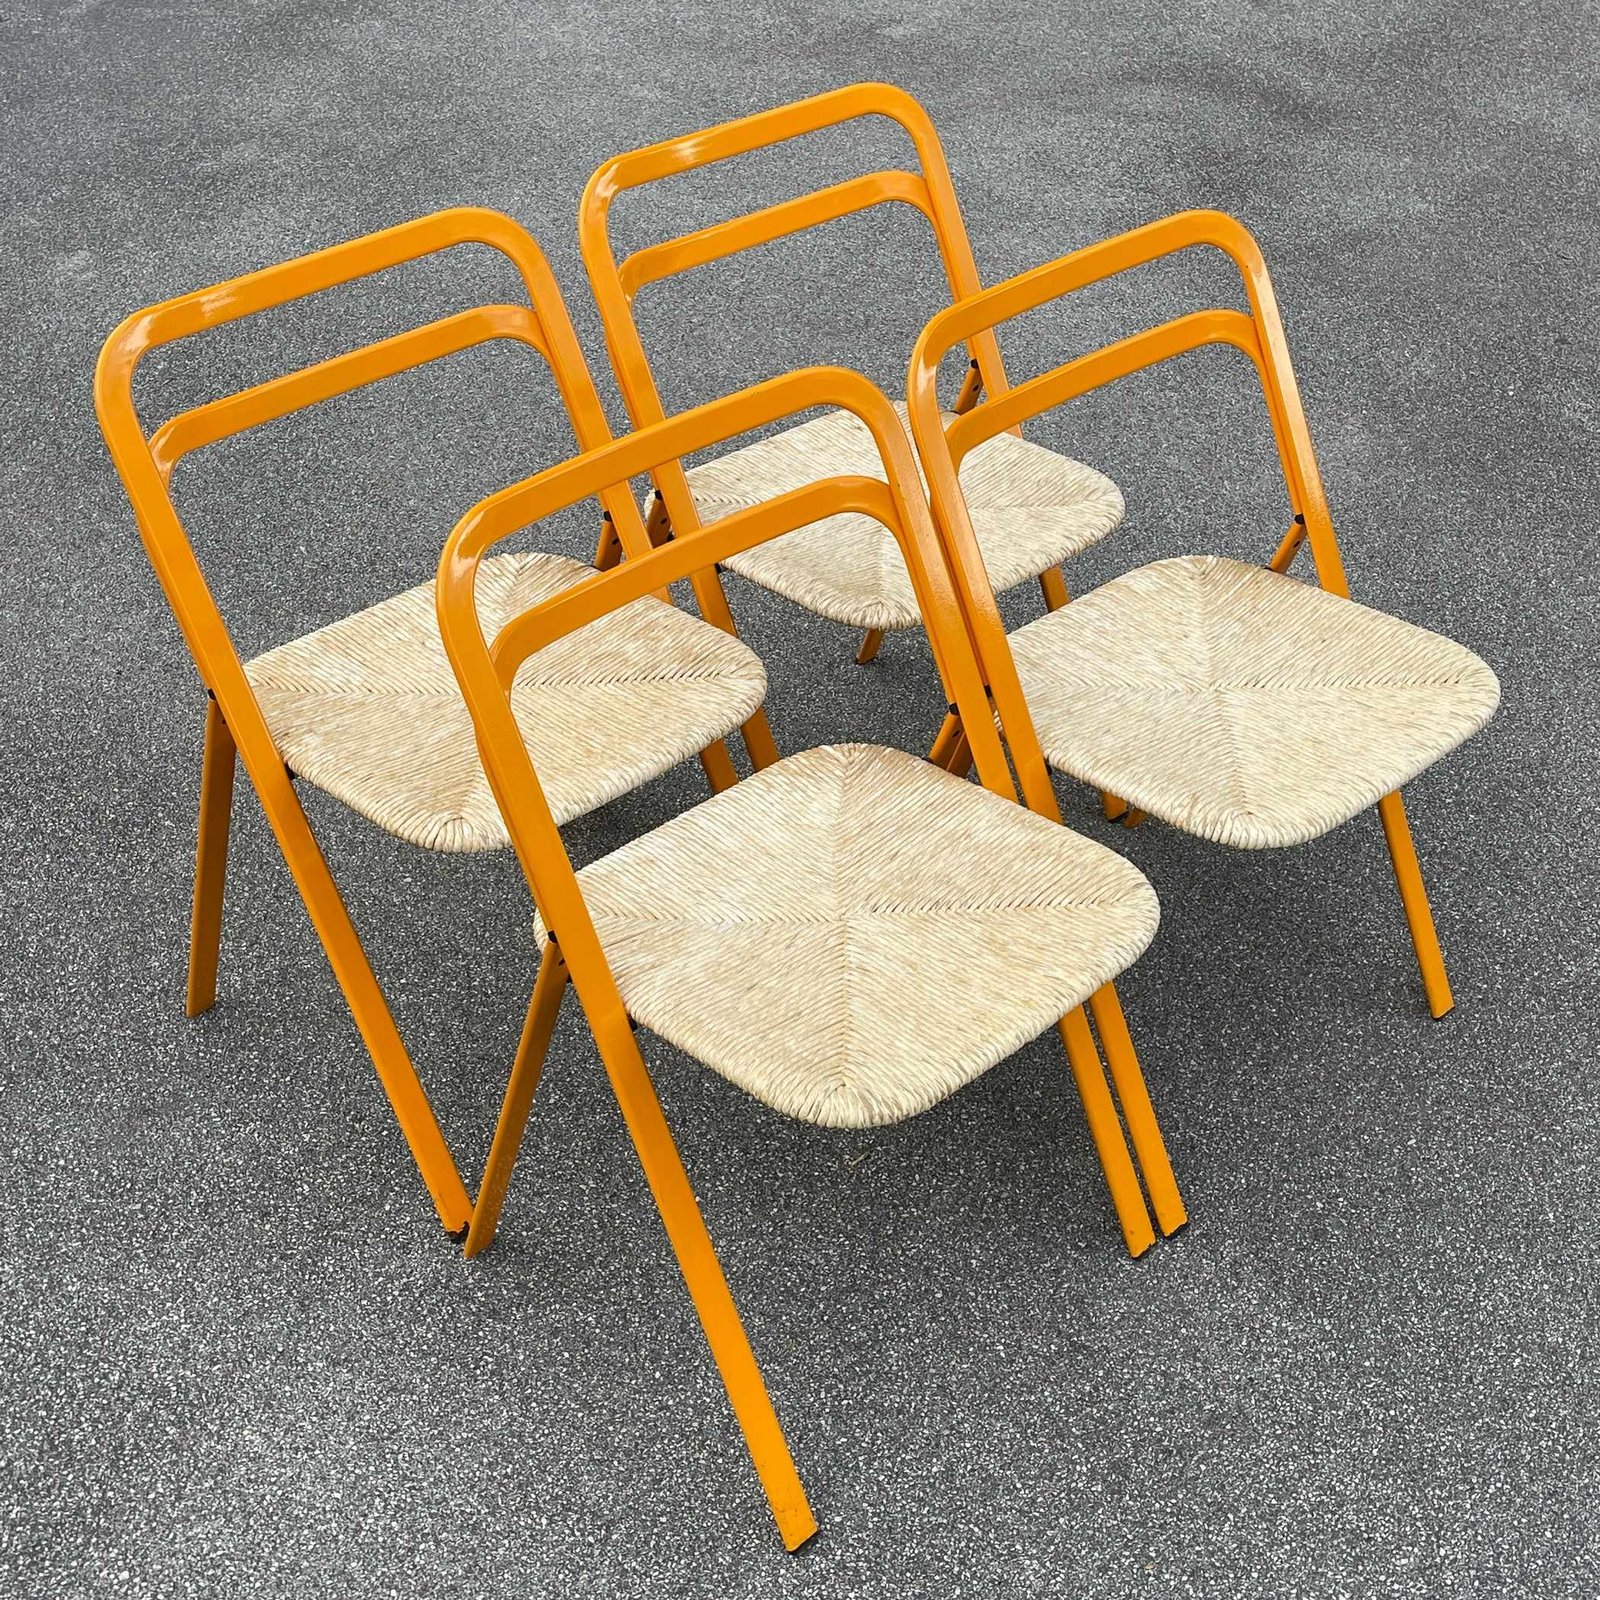 Set of 4 Italian Folding Chairs by Giorgio Cattelan for Cidue, 1970s Mid-century design chair Italian modern Set dining chair